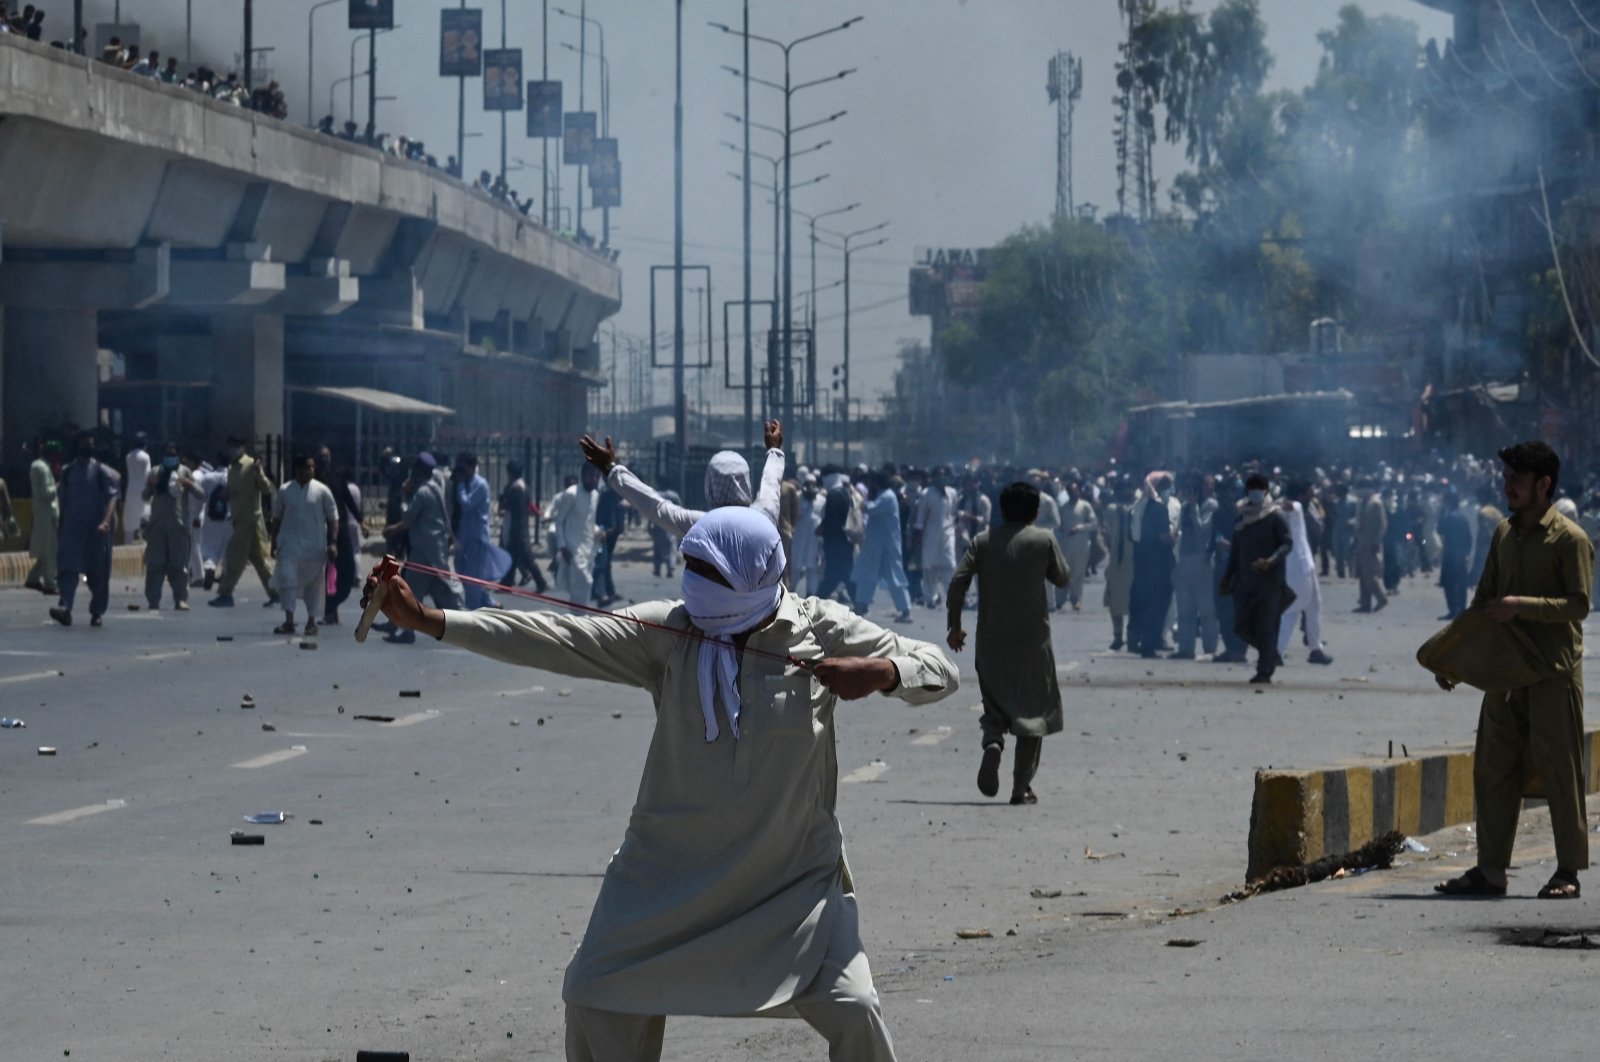 Pakistan Tehreek-e-Insaf (PTI) party activists and supporters of former Prime Minister Imran Khan clash with police in Peshawar, Pakistan, May 10, 2023. (AFP Photo)